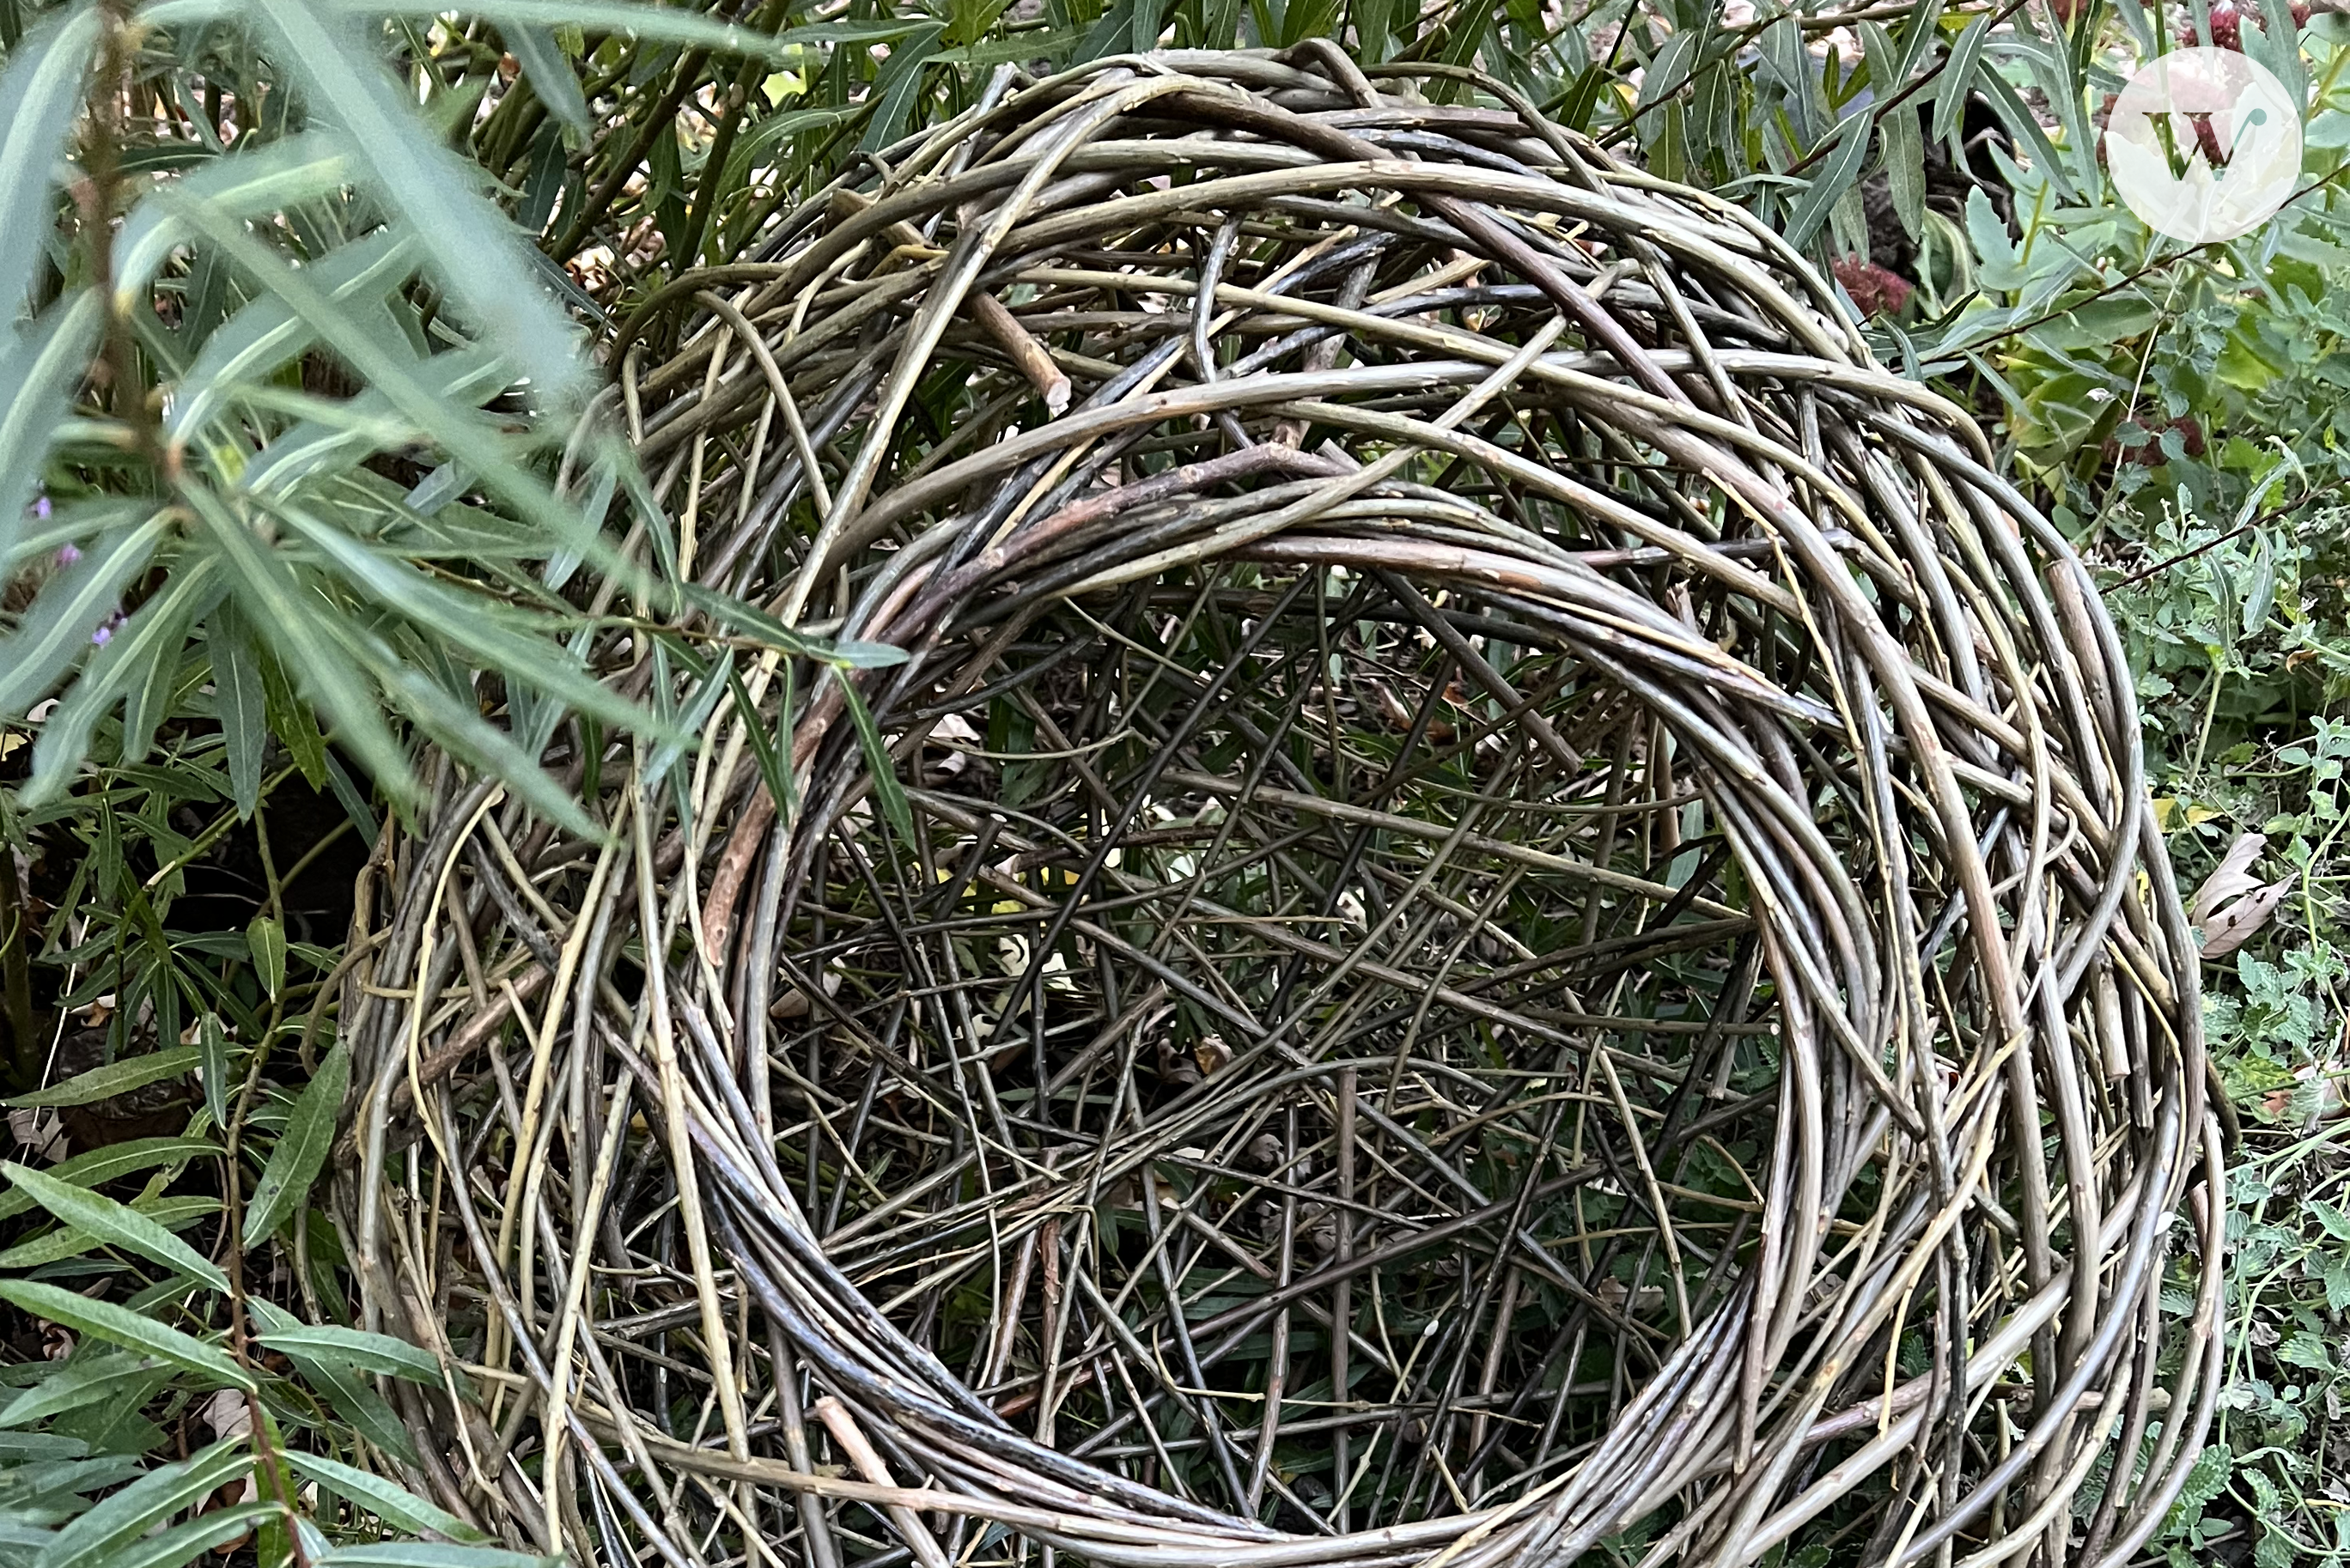 A photograph of a round willow sculpture.